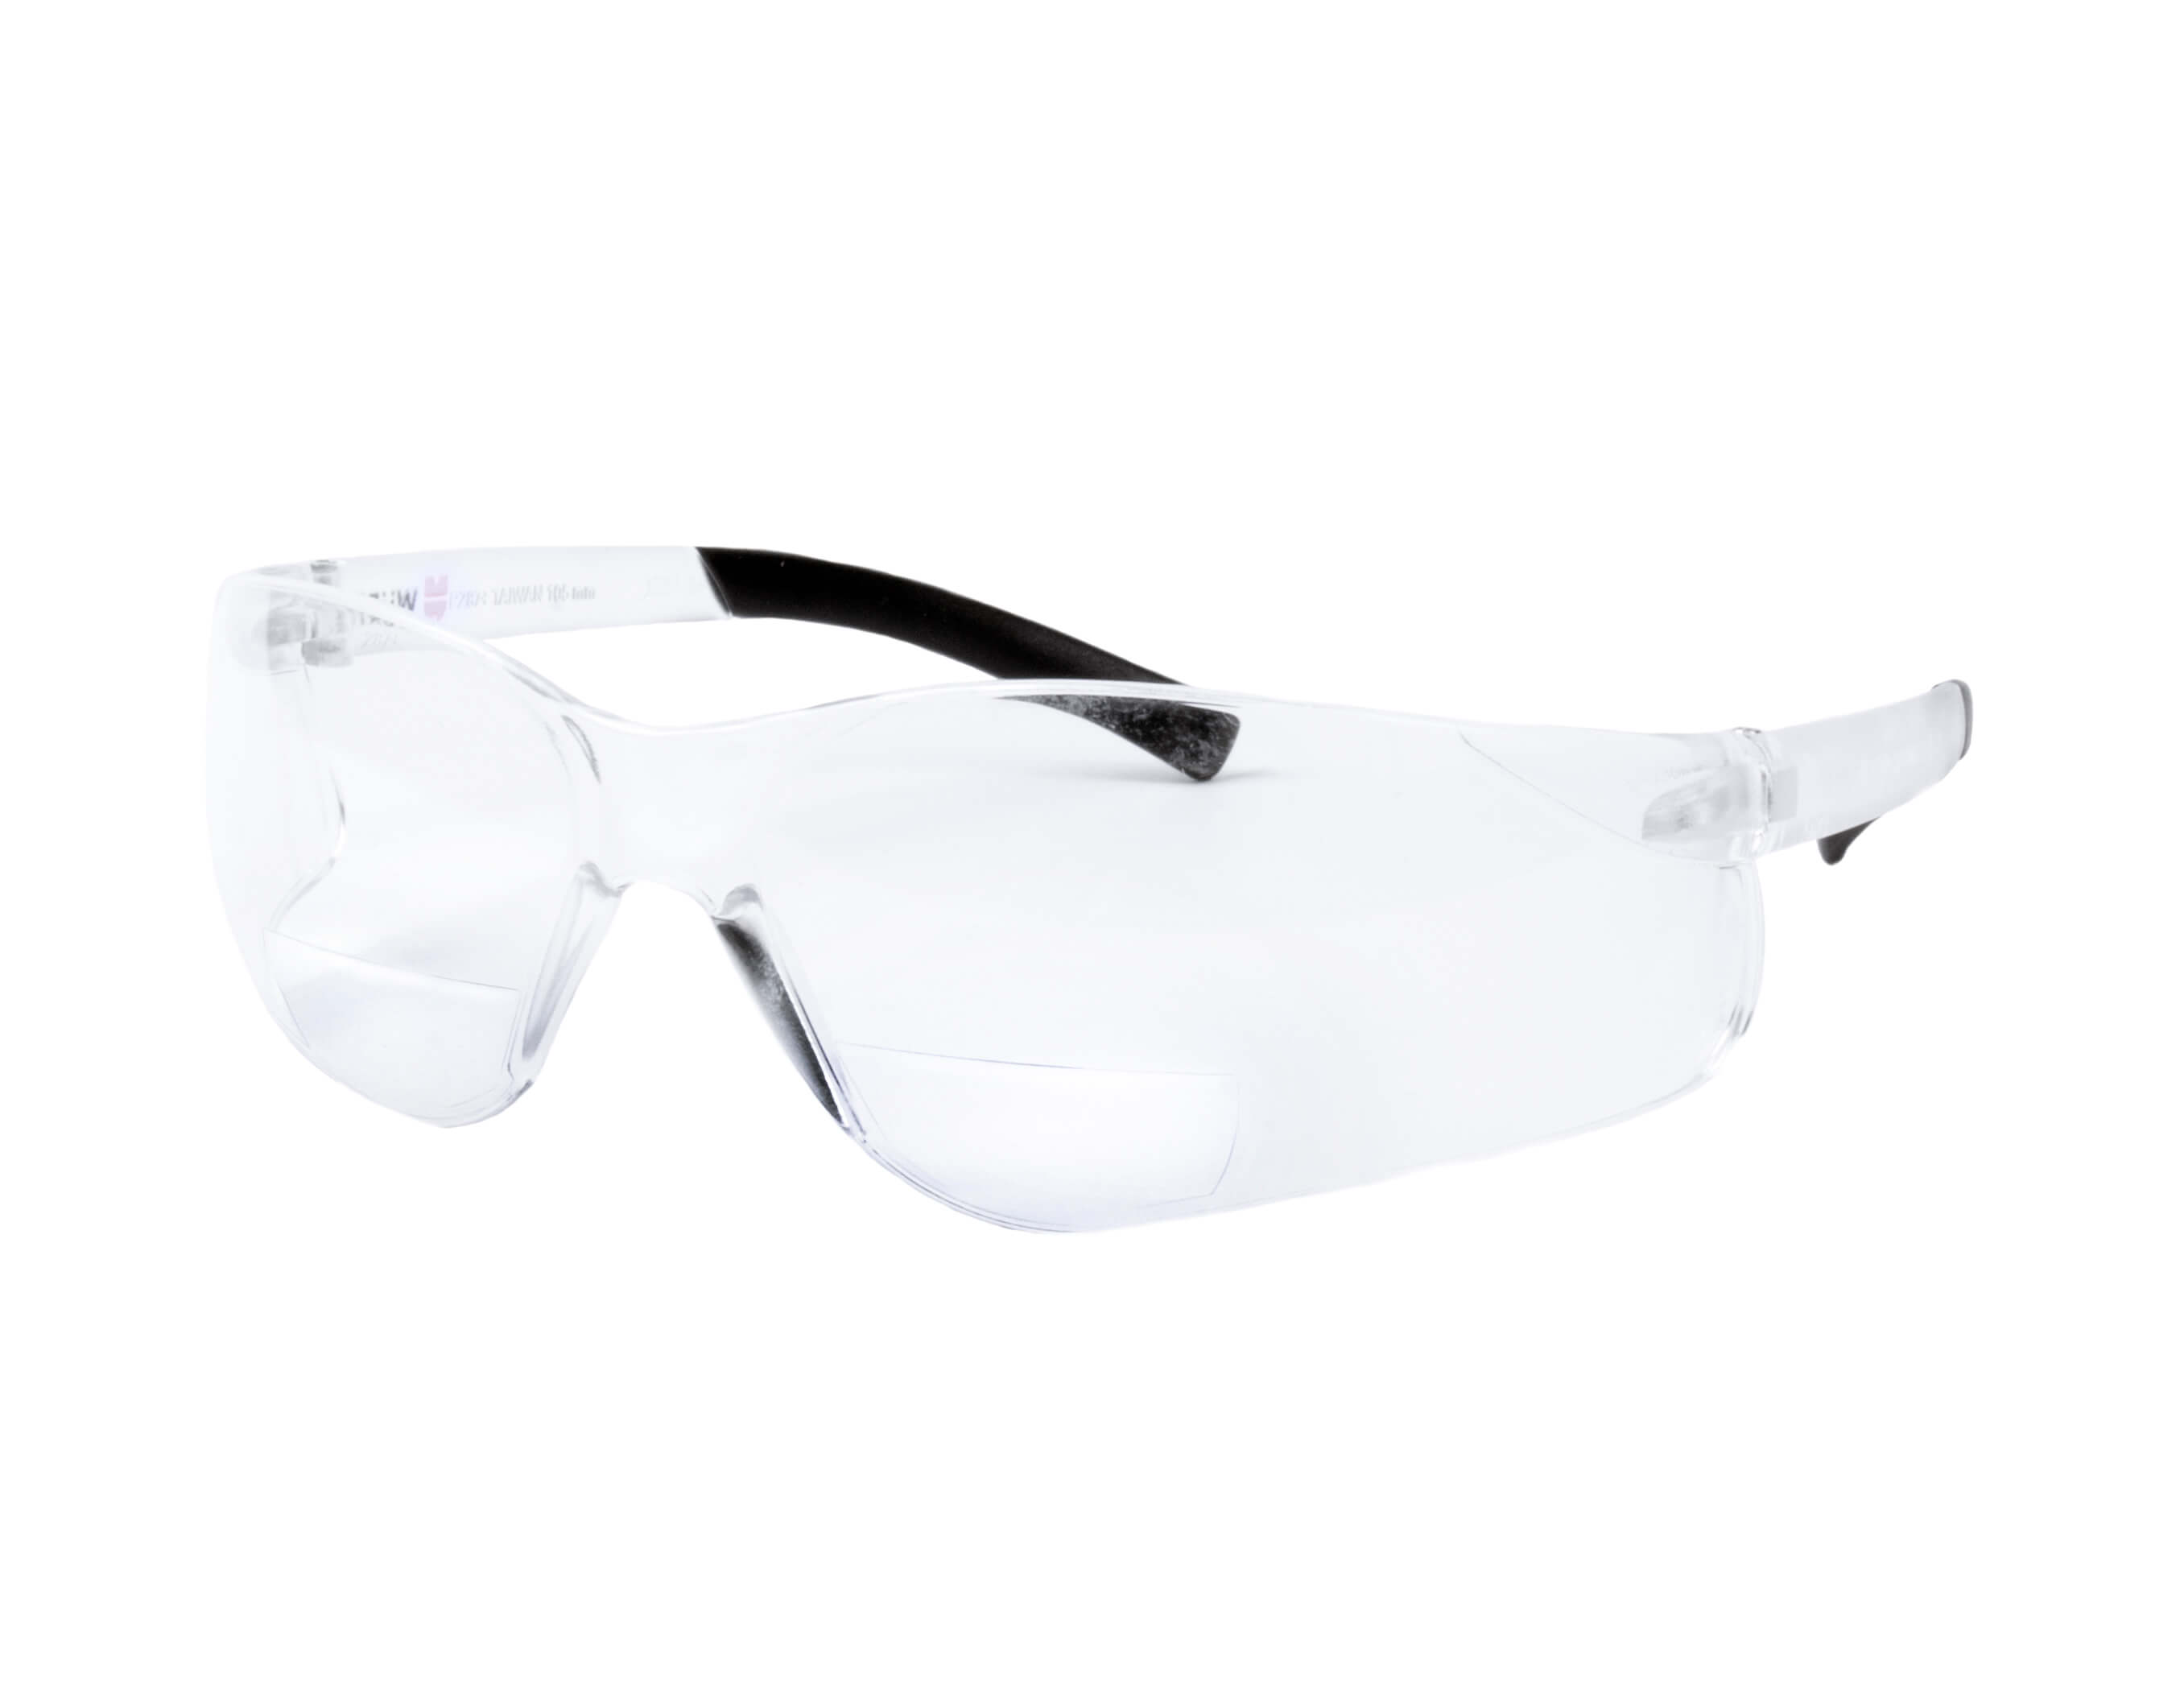 ARIES SAFETY GLASSES - BLK TMPL/CLEAR LENS 1.5